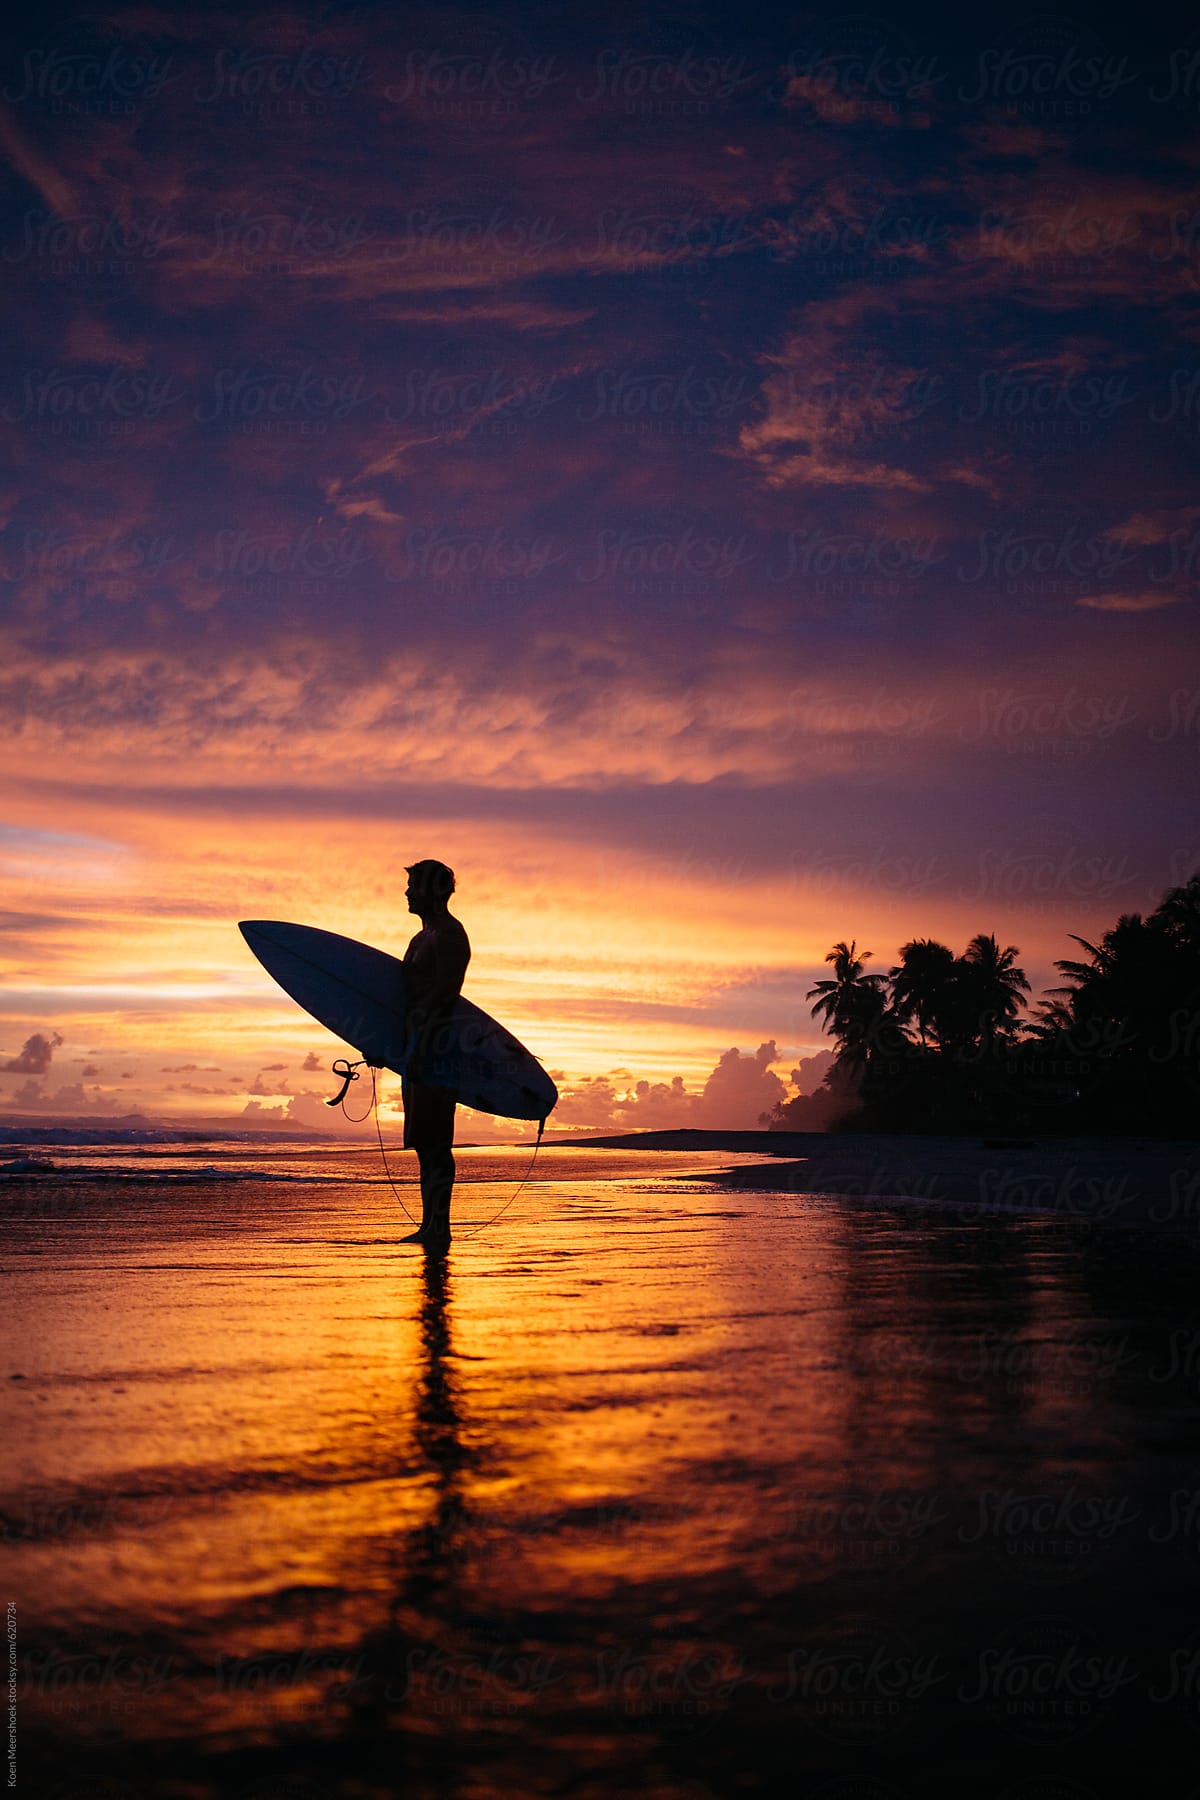 Silhouette Of A Surfer On The Beach With A Colorful Sunset